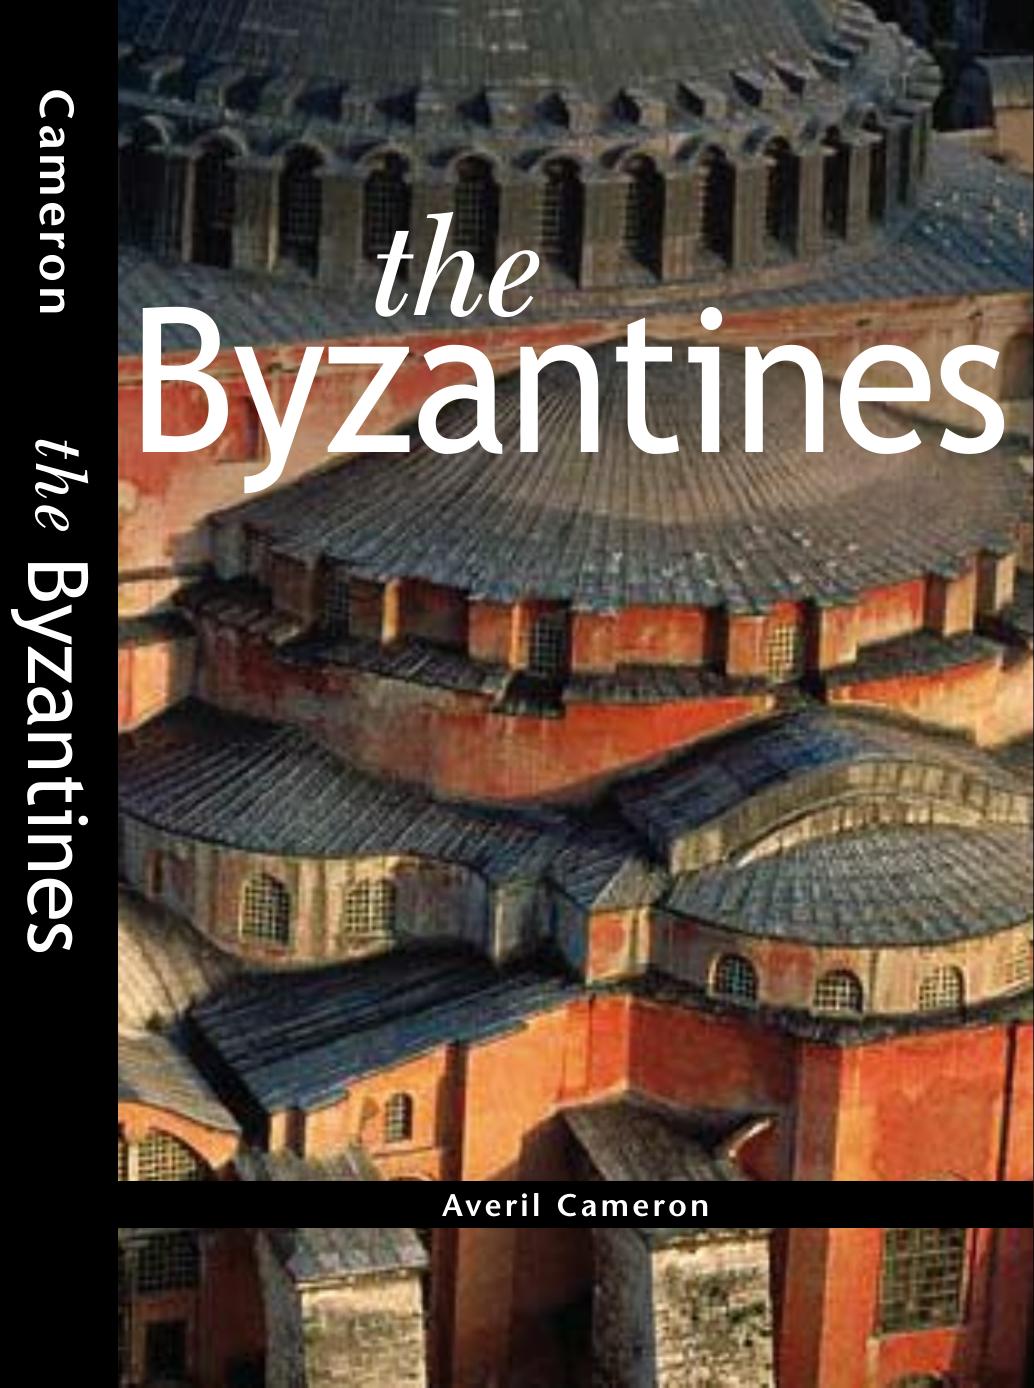 The Byzantines